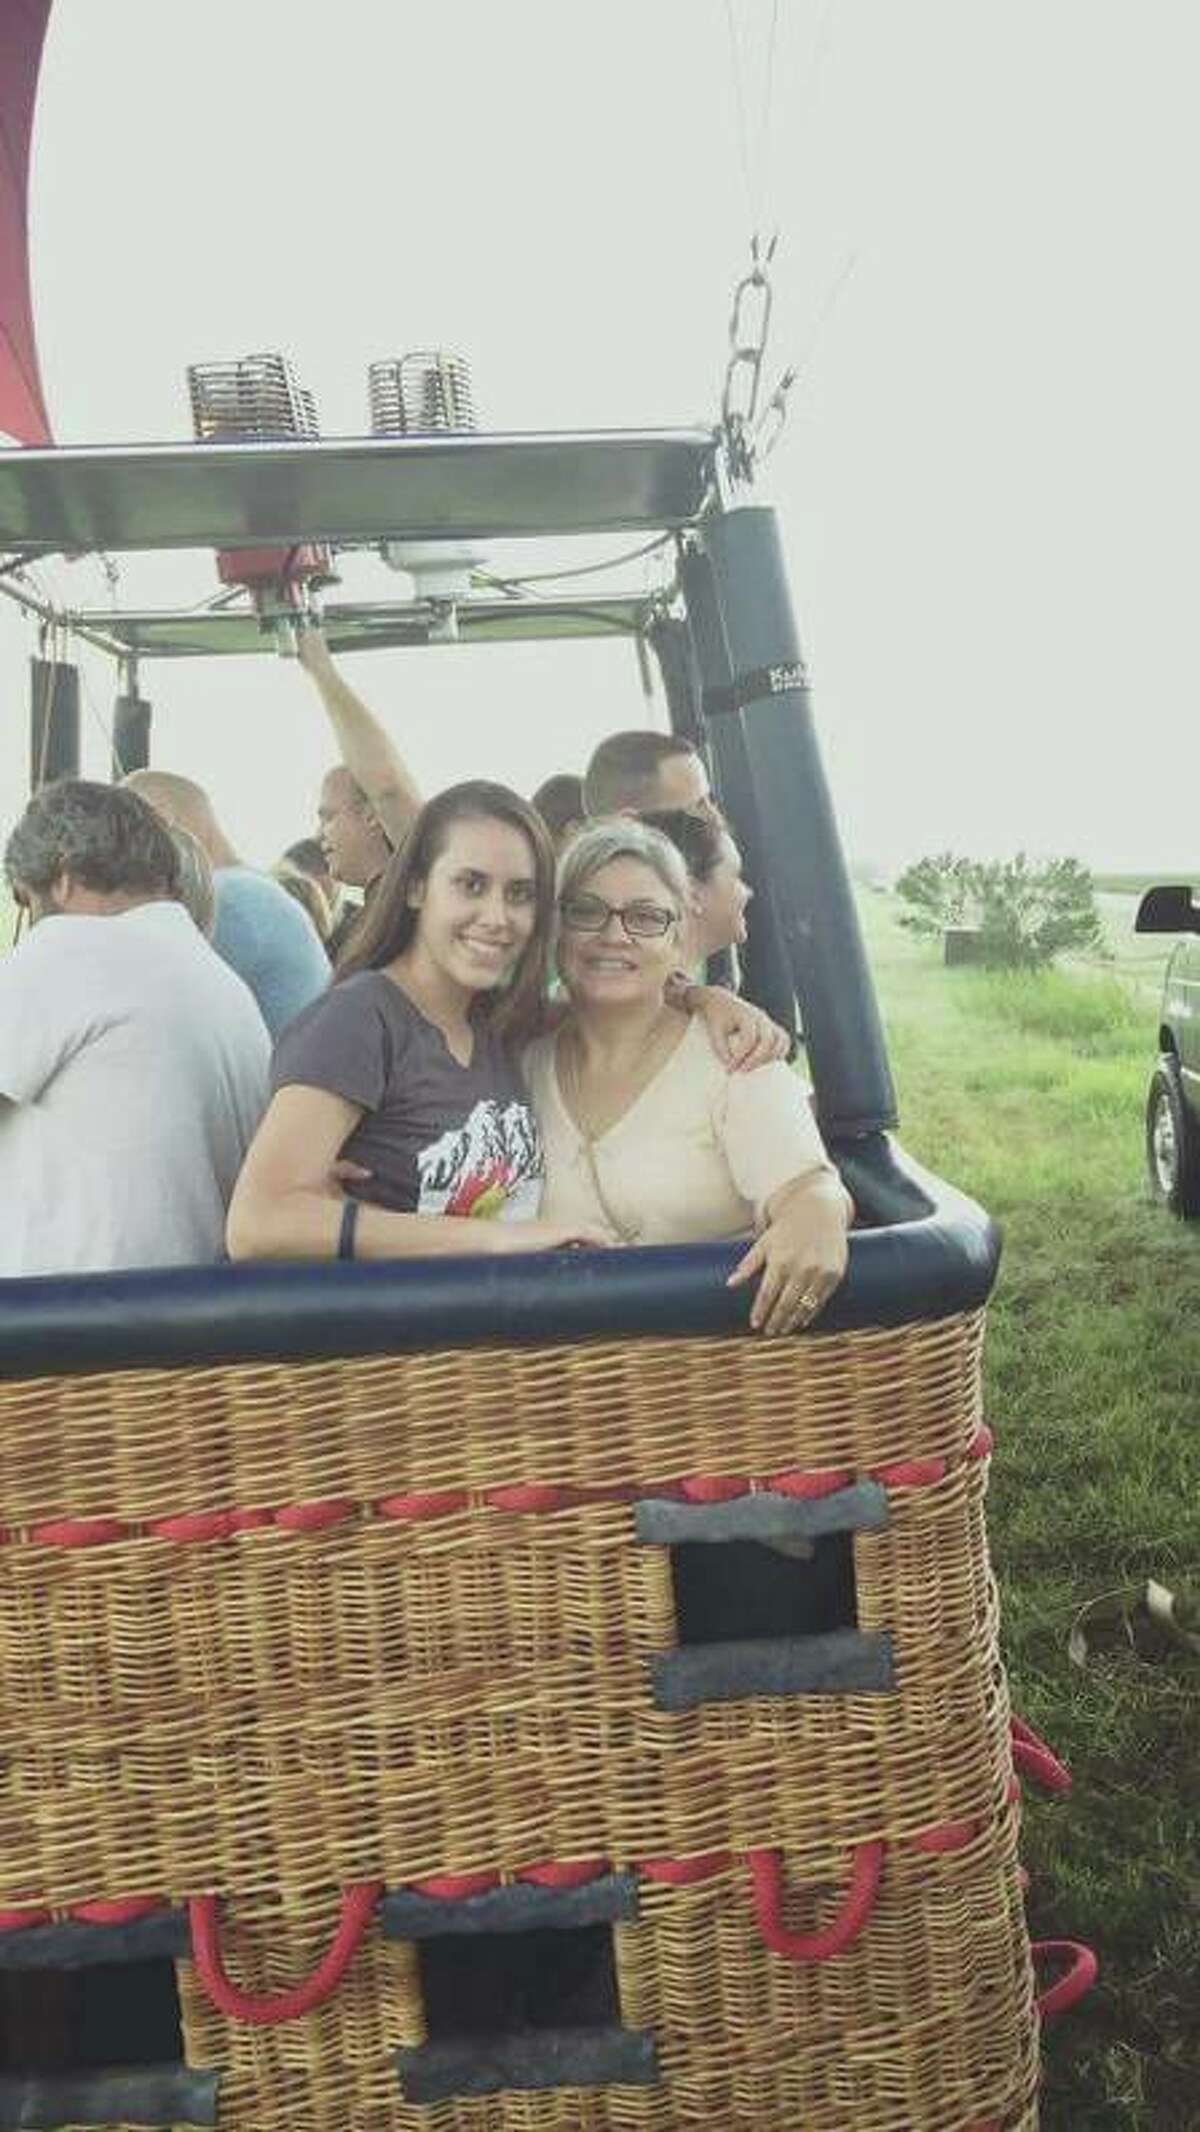 Lorilee, left, and Paige Brabson, right, were among the 16 people killed July 30 in a hot air balloon crash in Lockhart. The mother-daughter pair lived and worked in San Antonio. Paige Brabson leaves behind an 11-month-old baby girl.